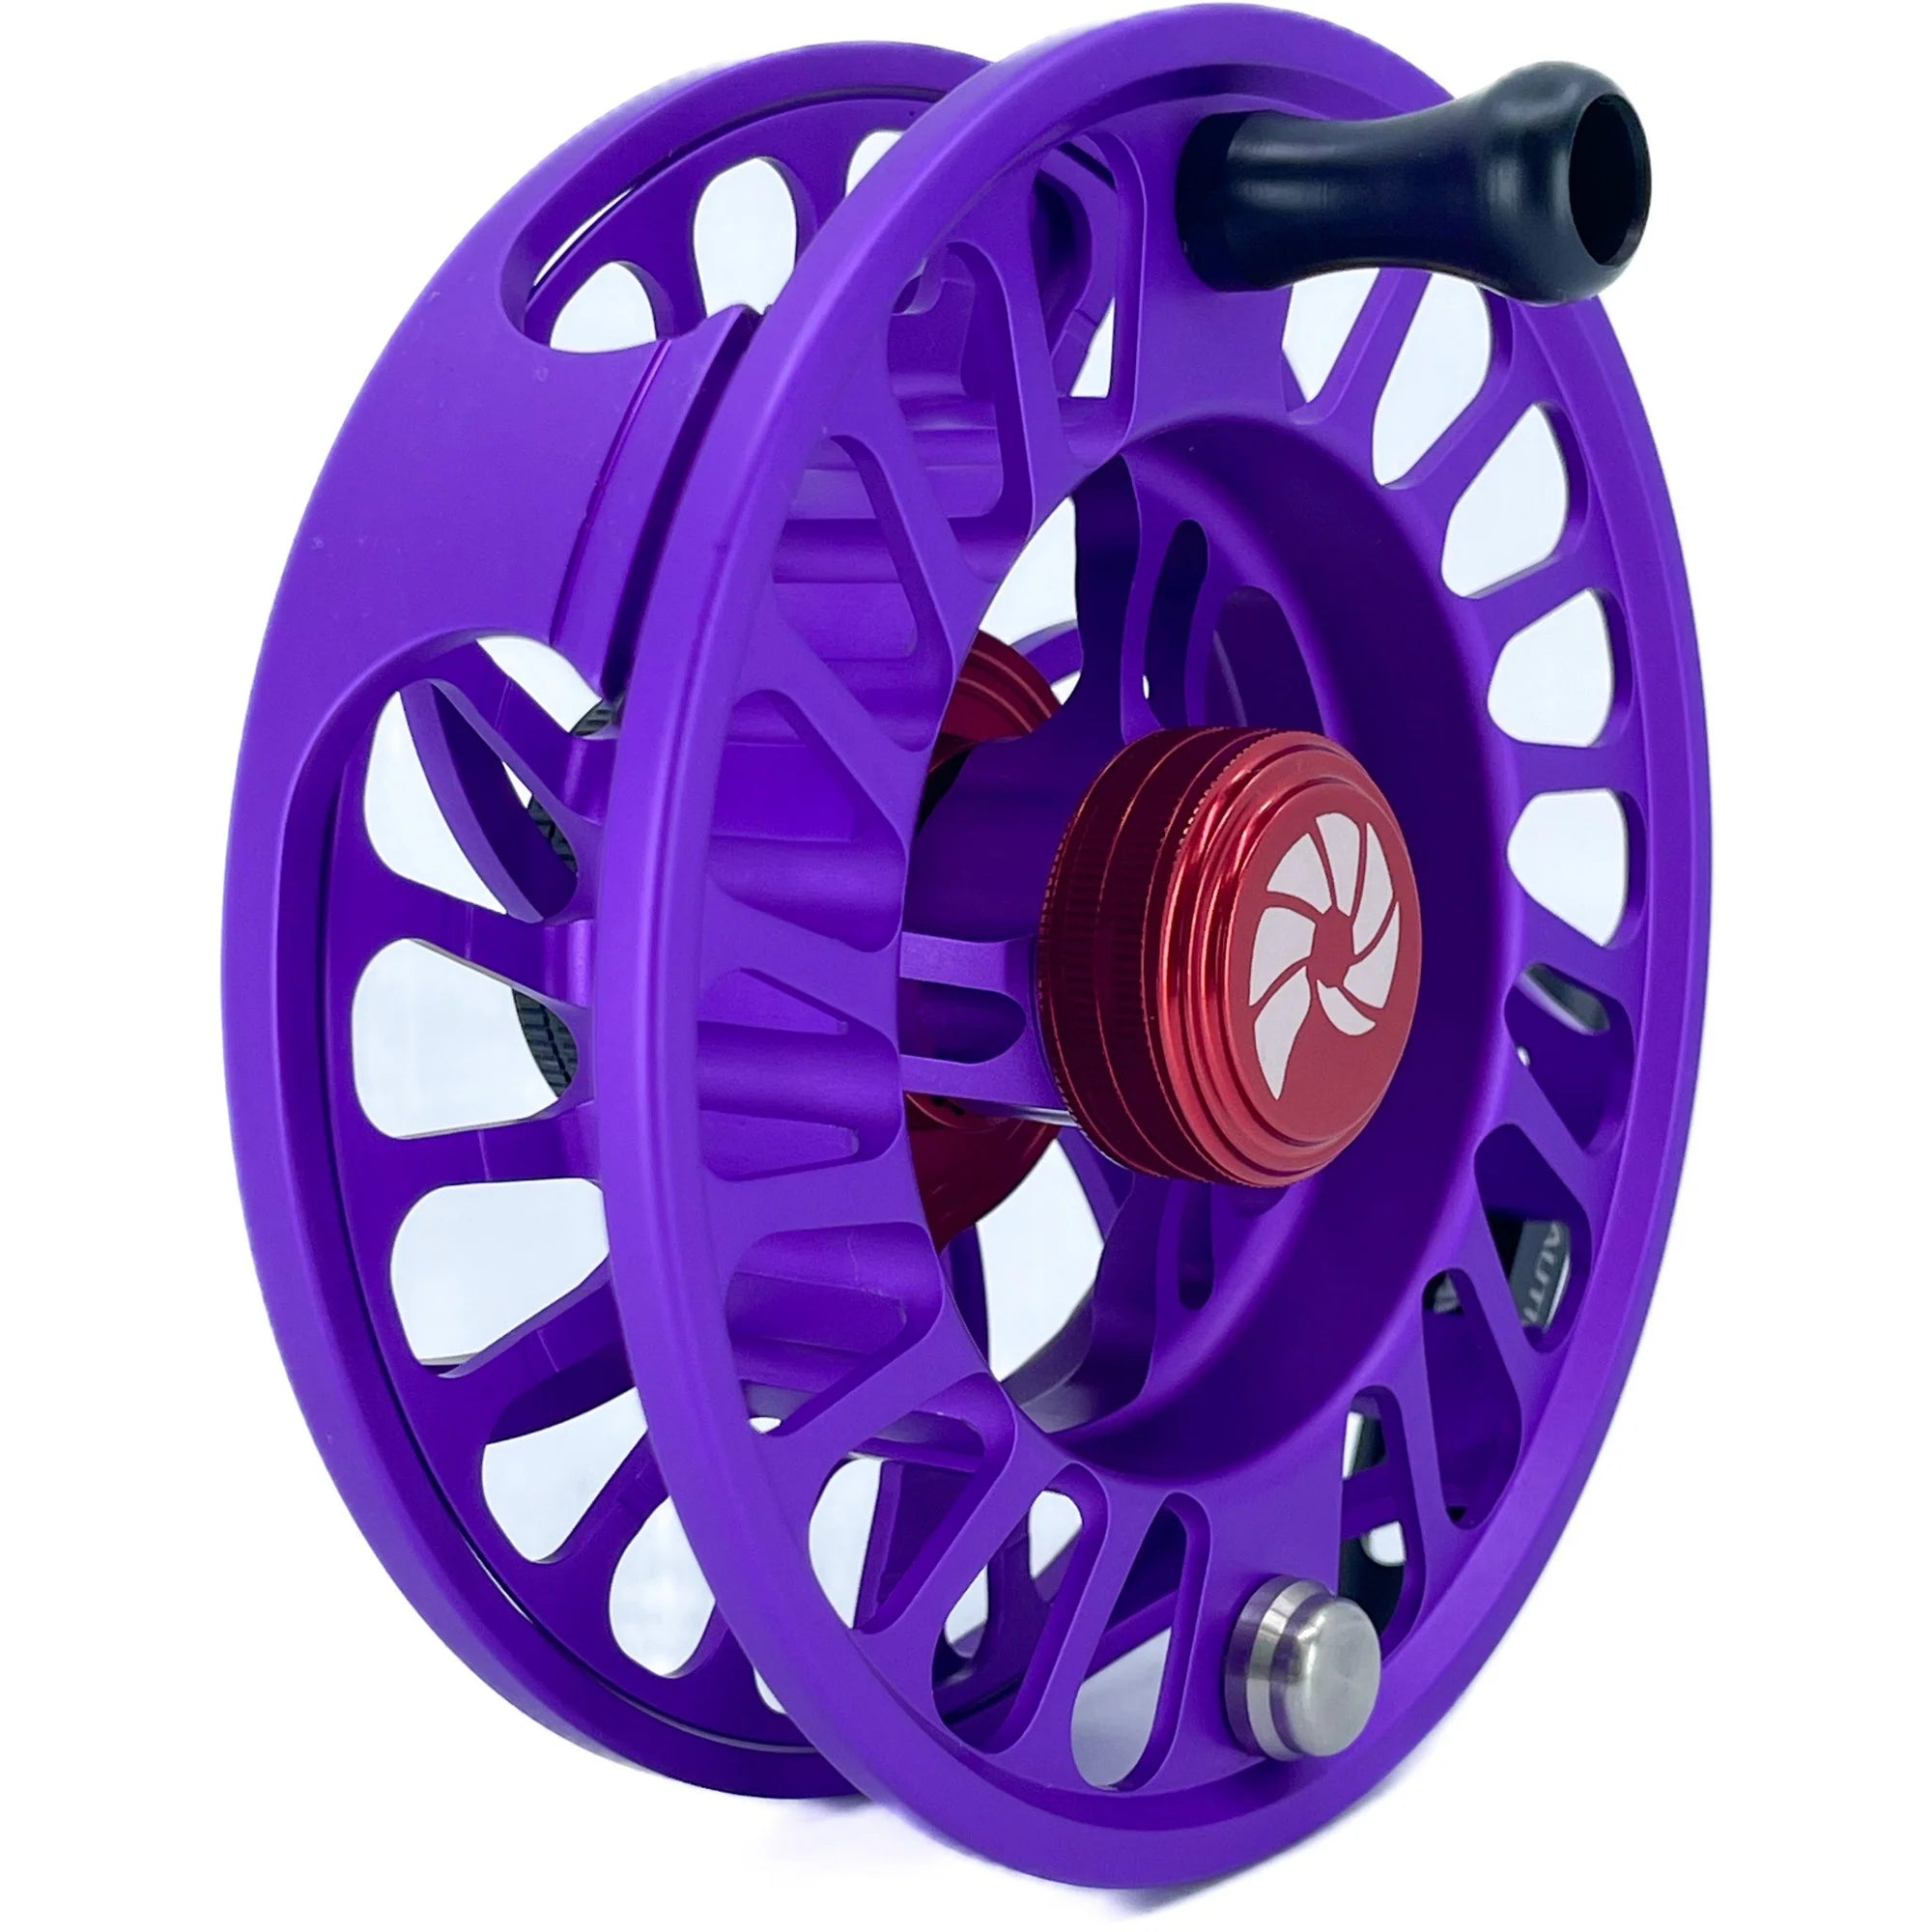 Nautilus NV-G Turquoise 8/9 Fly Reel - Full Custom with Violet/Purple